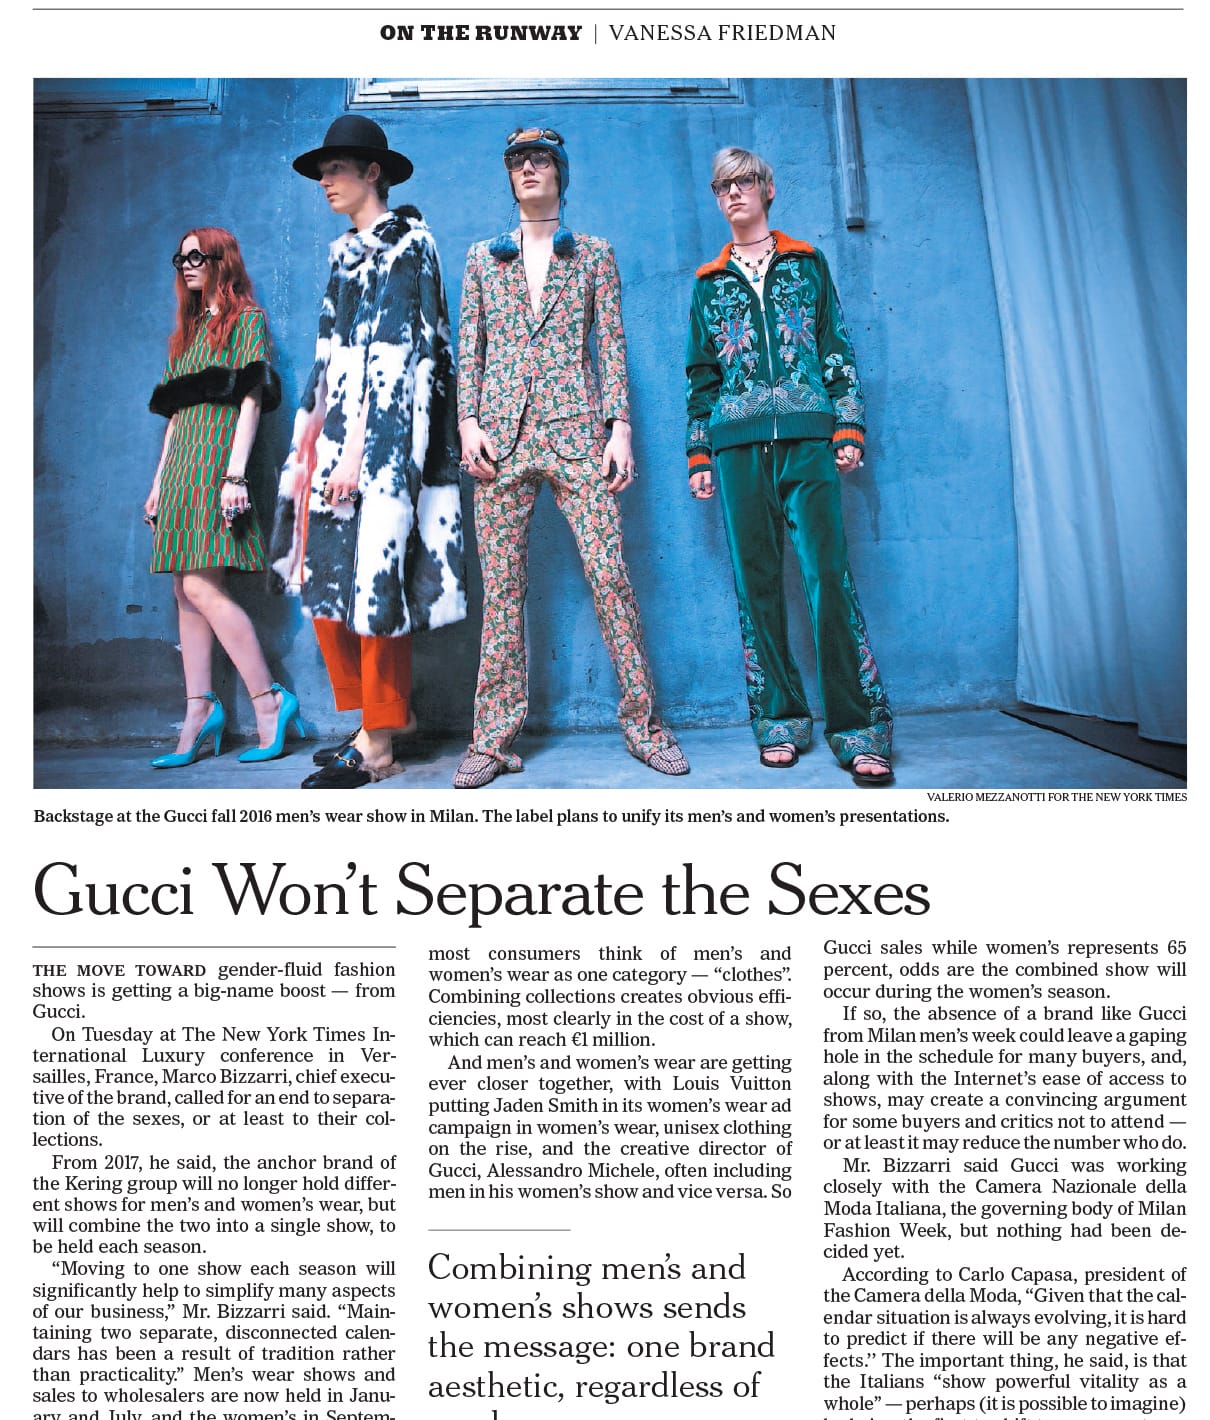 Gucci Fashion Show Backstage, Photo by Valerio Mezzanotti for The New York Times